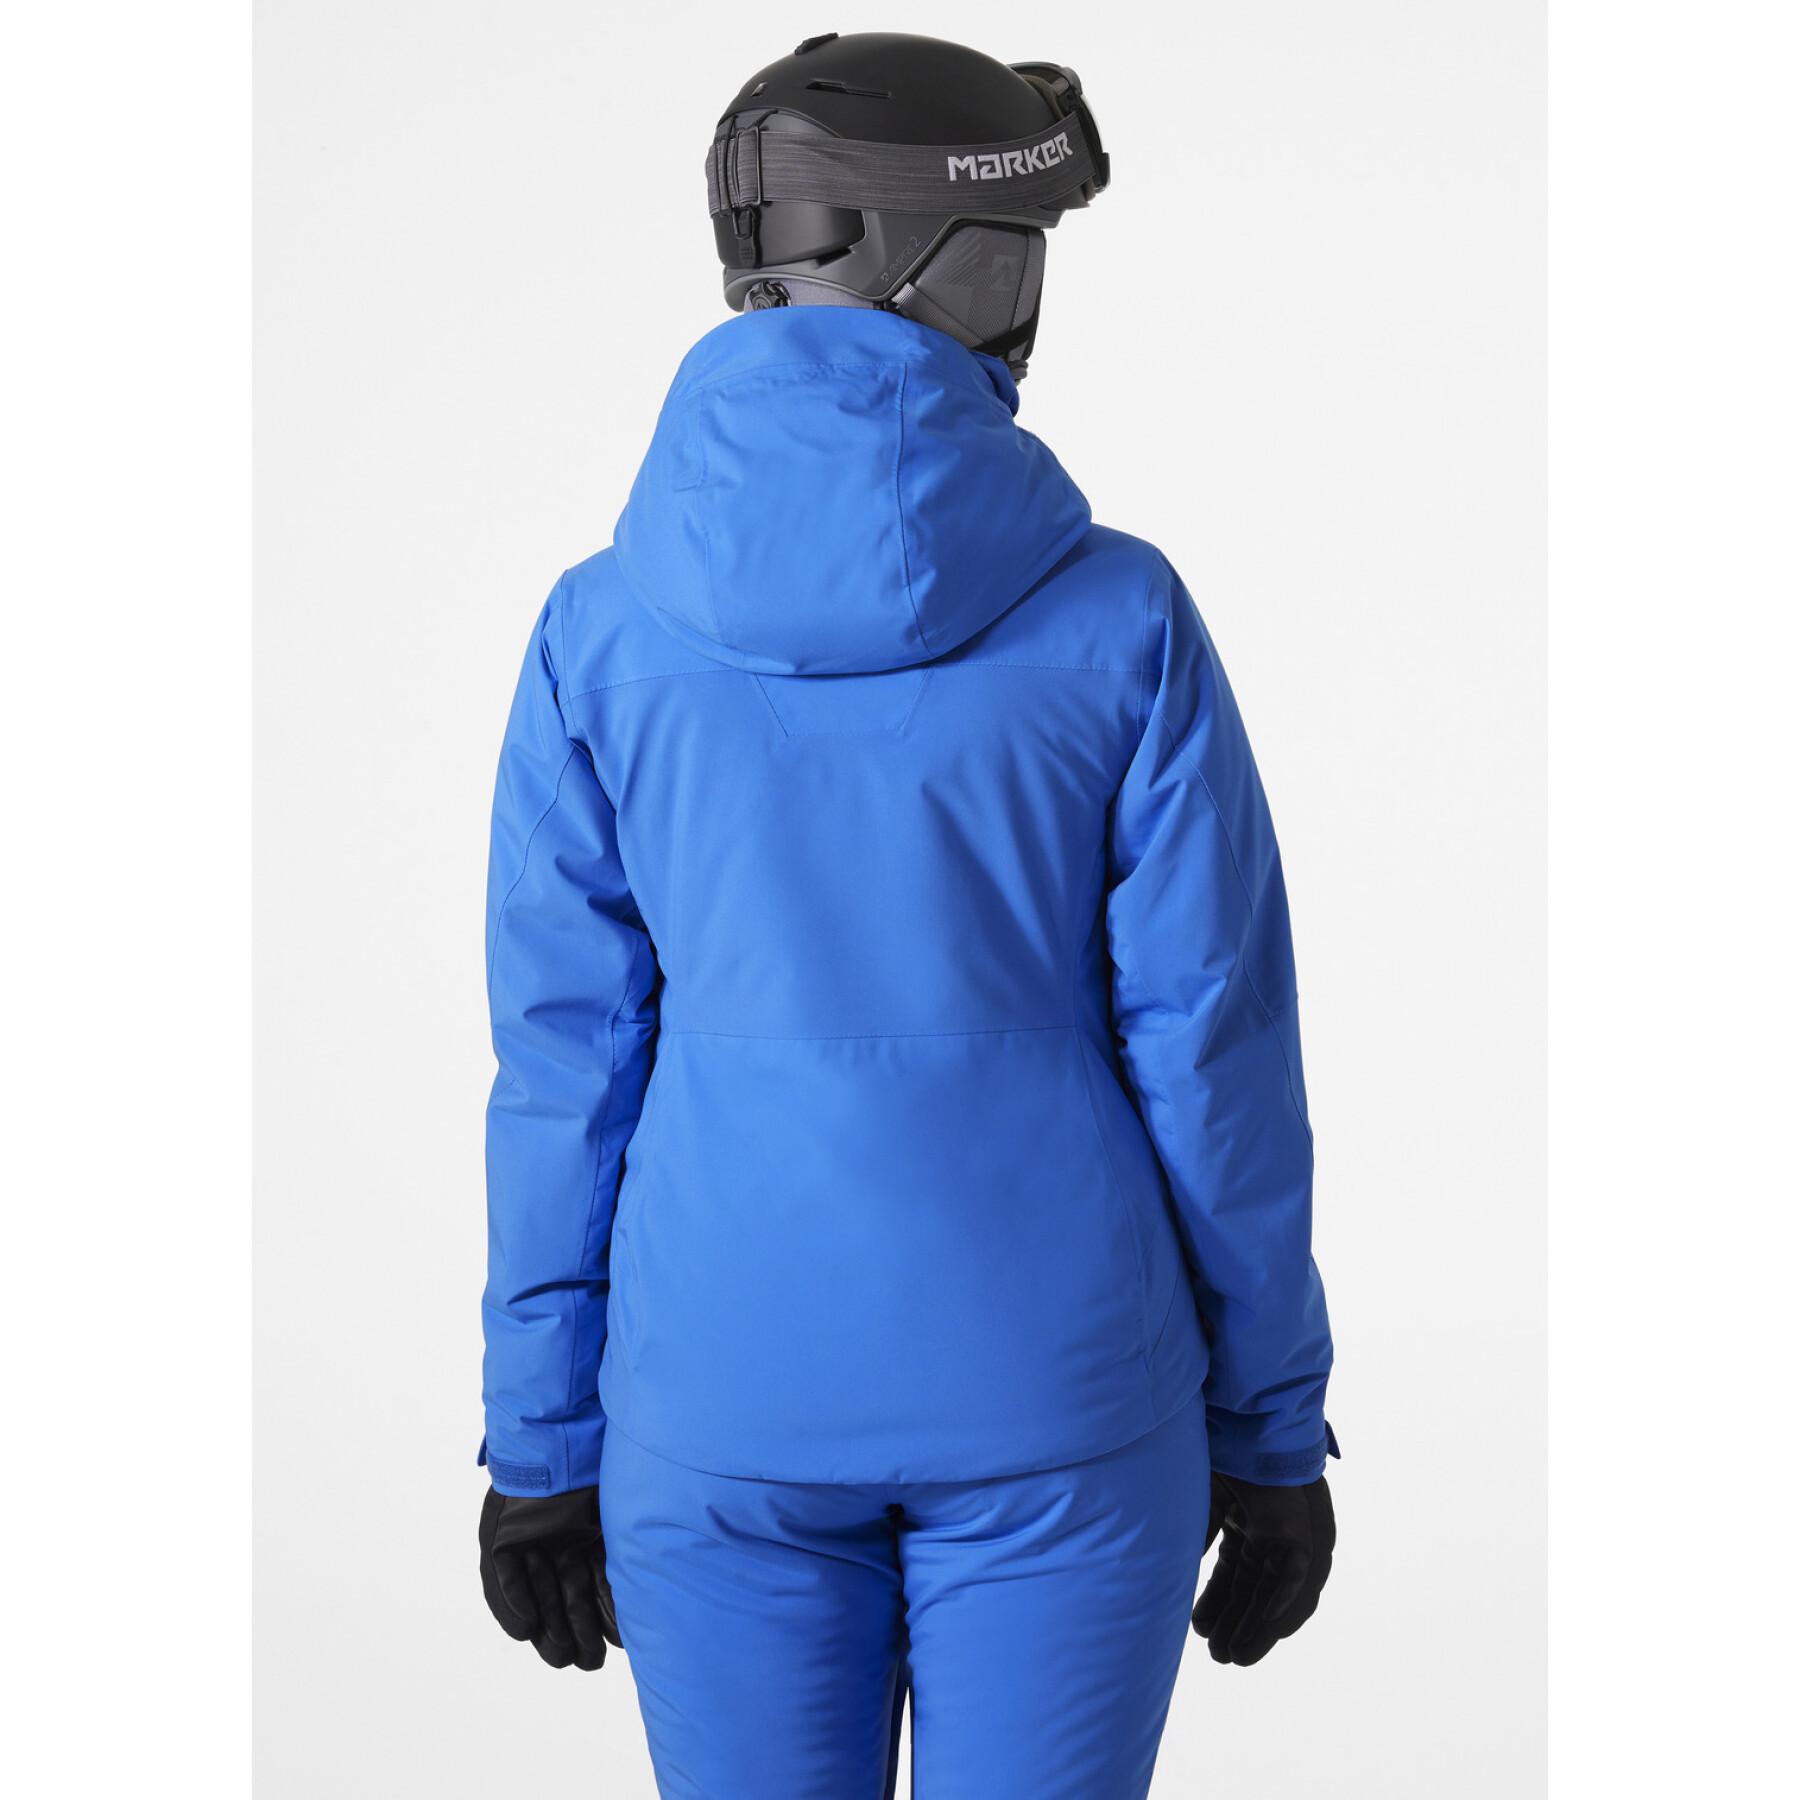 Chaqueta impermeable mujer Helly Hansen Motionista Infinity